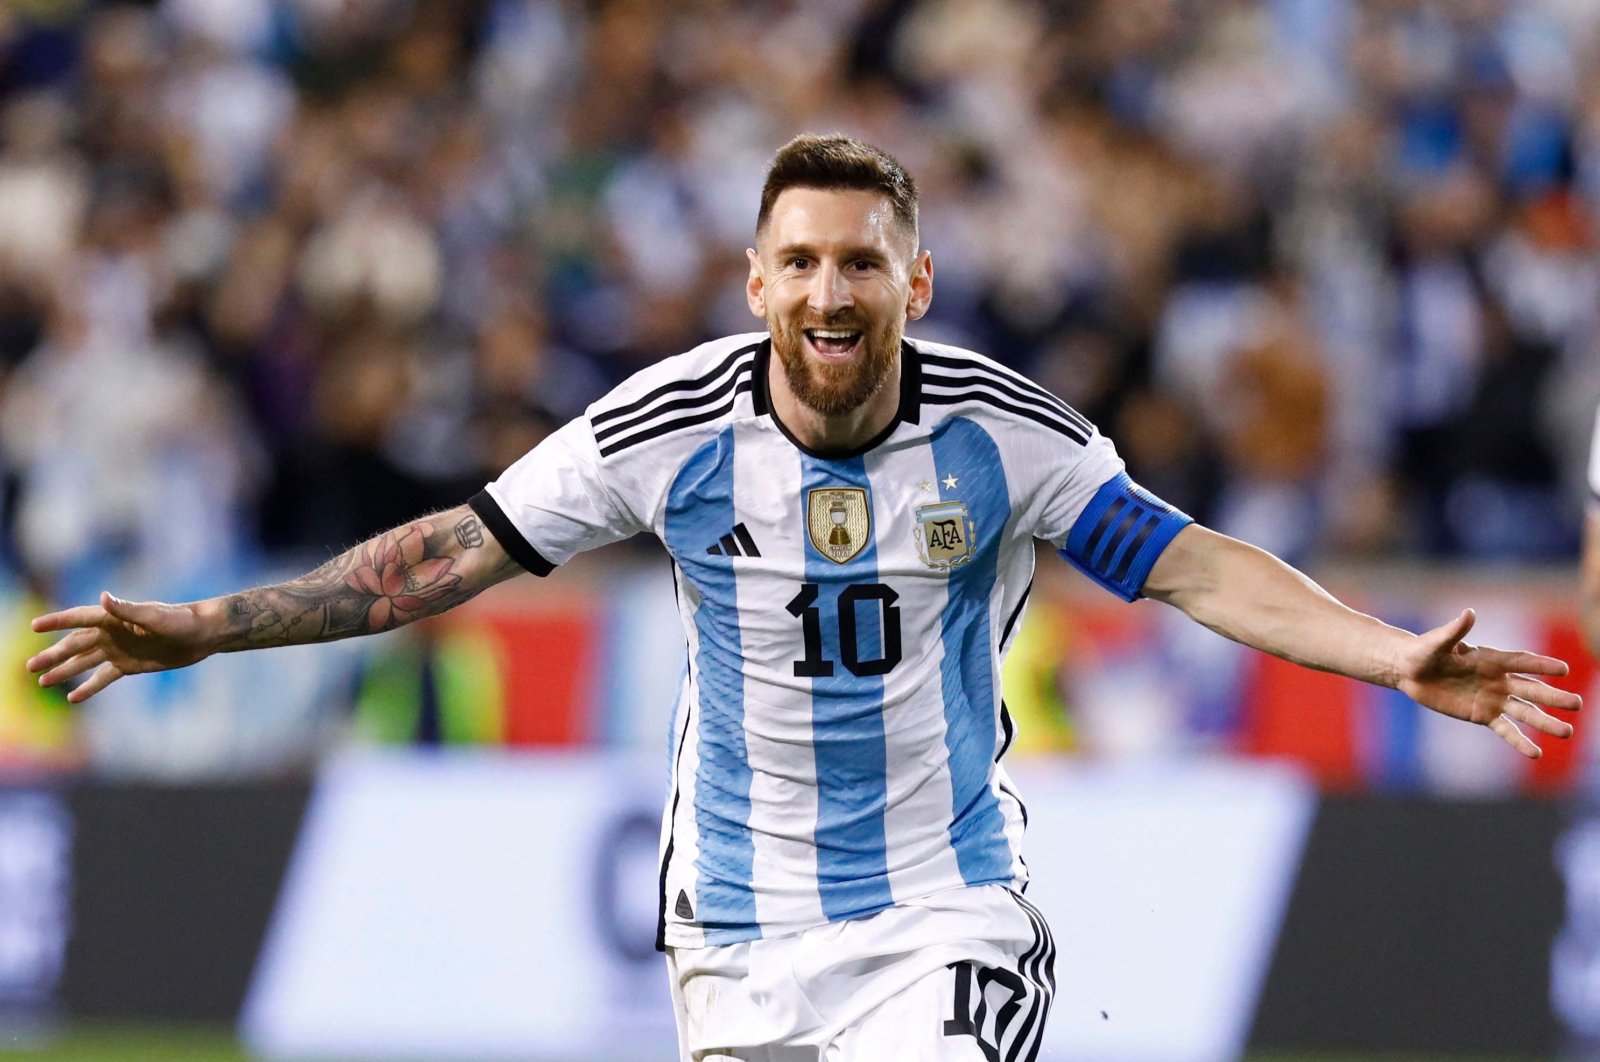 Argentina&#039;s Lionel Messi celebrates his goal during the international friendly football match between Argentina and Jamaica at Red Bull Arena, Harrison, New Jersey. Sept. 28, 2022. (AFP Photo)